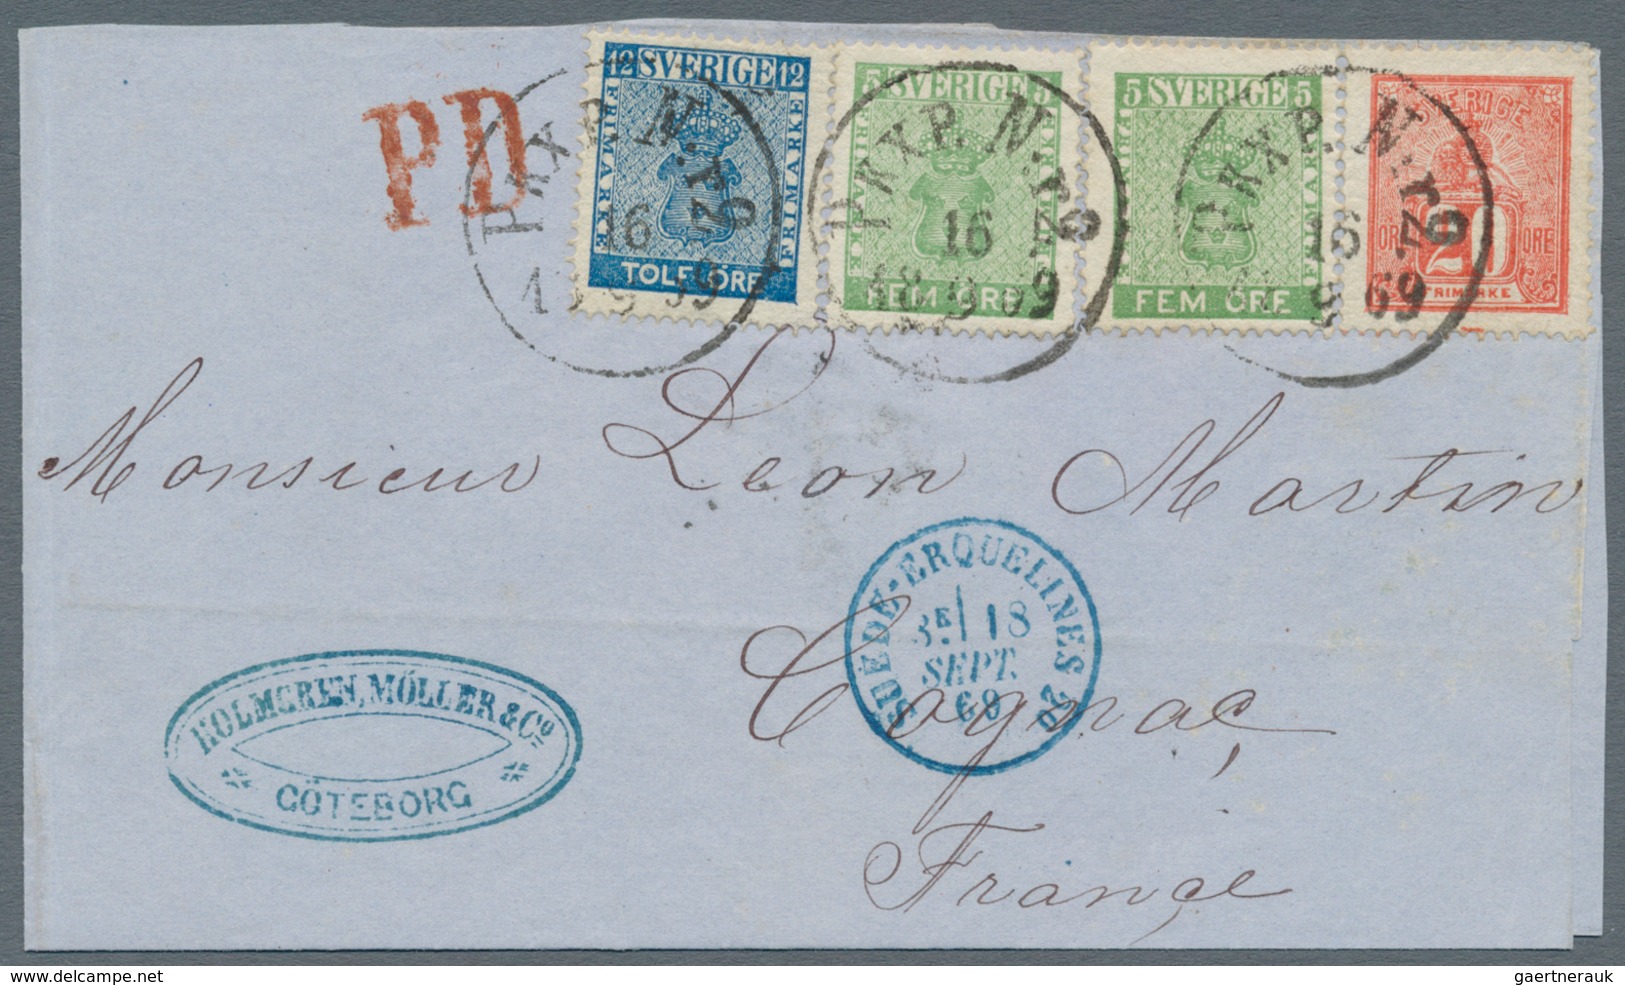 Schweden: 1869 Large Part Of Folded Cover From Göteborg To Cognac, France Carried In A Sealed Post-b - Gebruikt